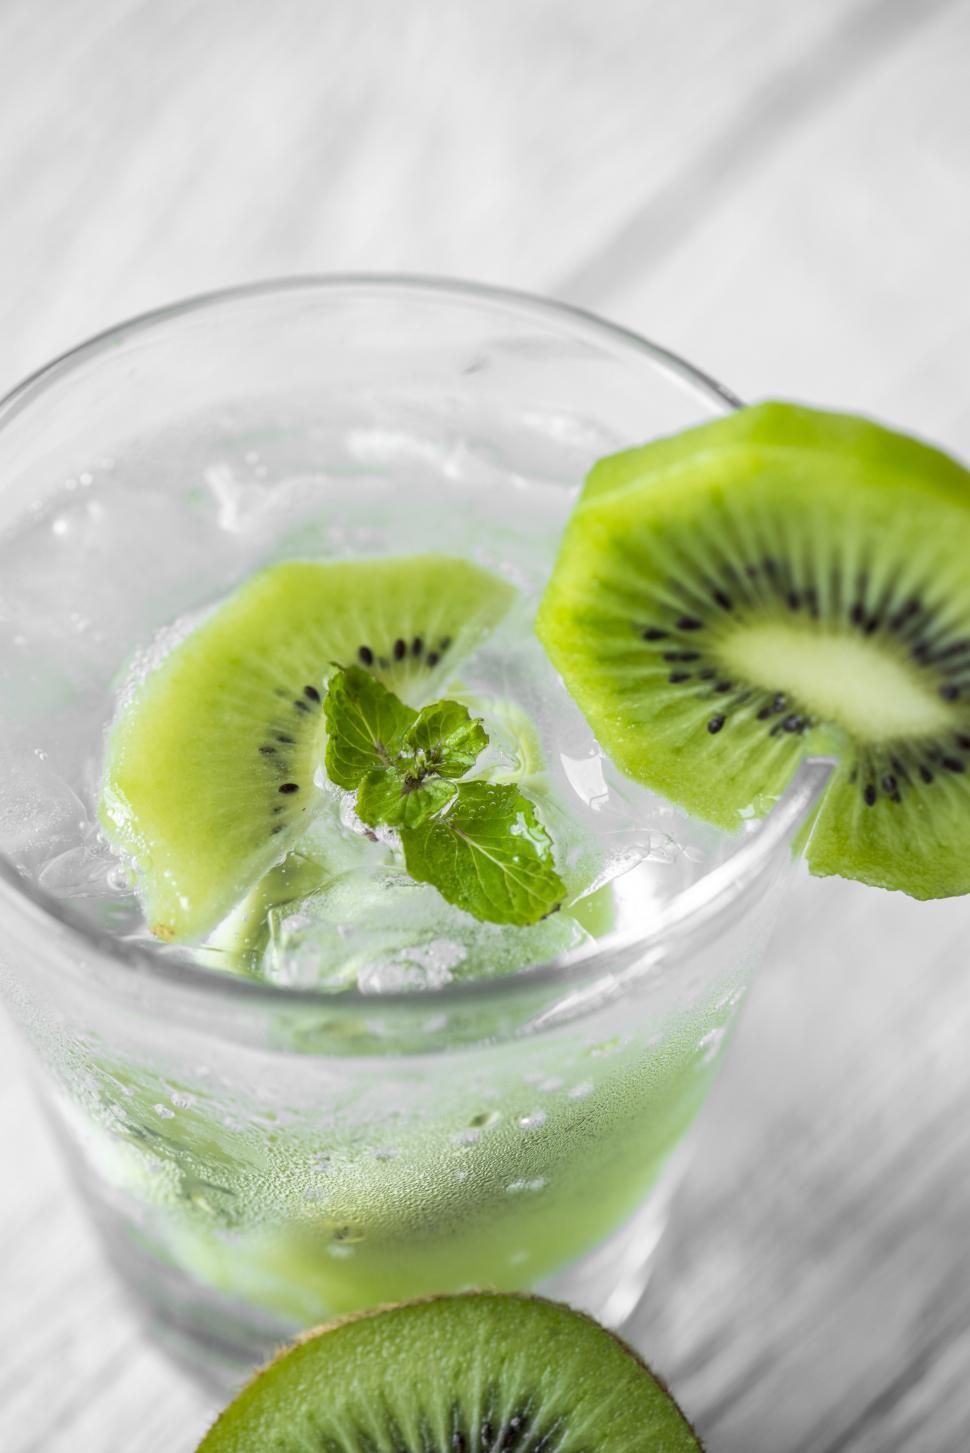 Free Image of Close up of a glass of chilled beverage garnished with kiwi slices 